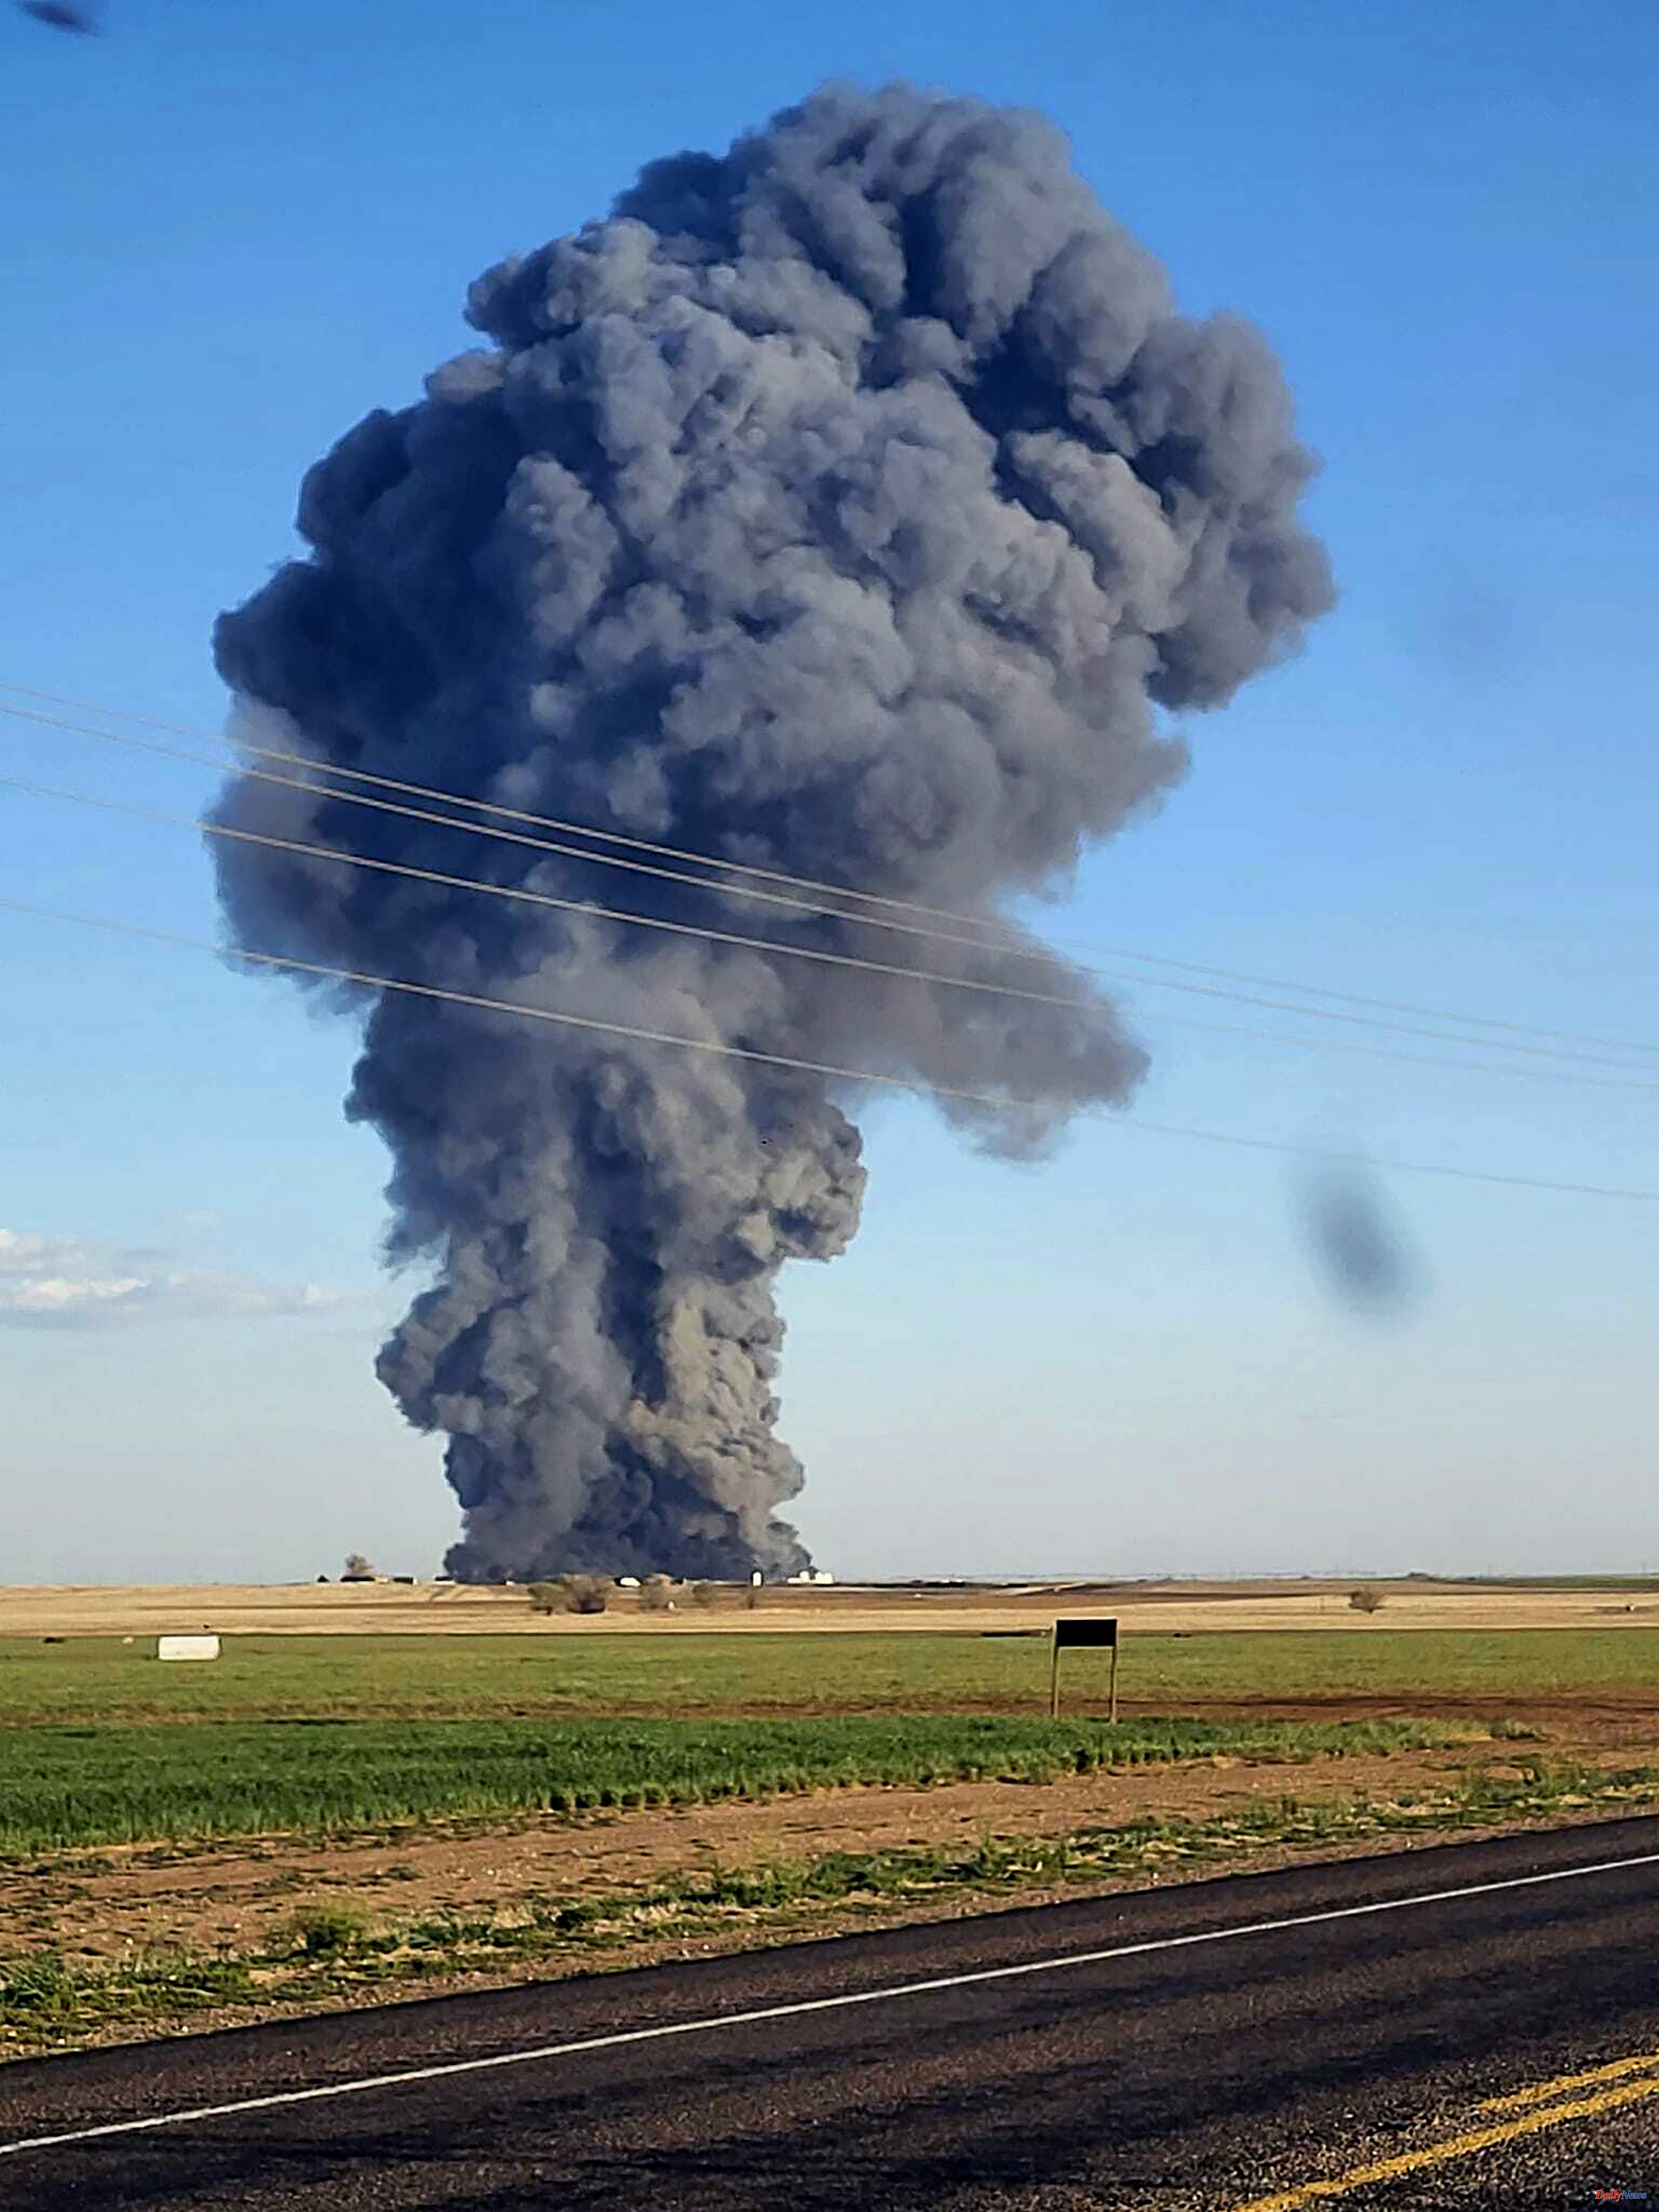 United States 18,000 cows killed in the explosion of a farm in Texas